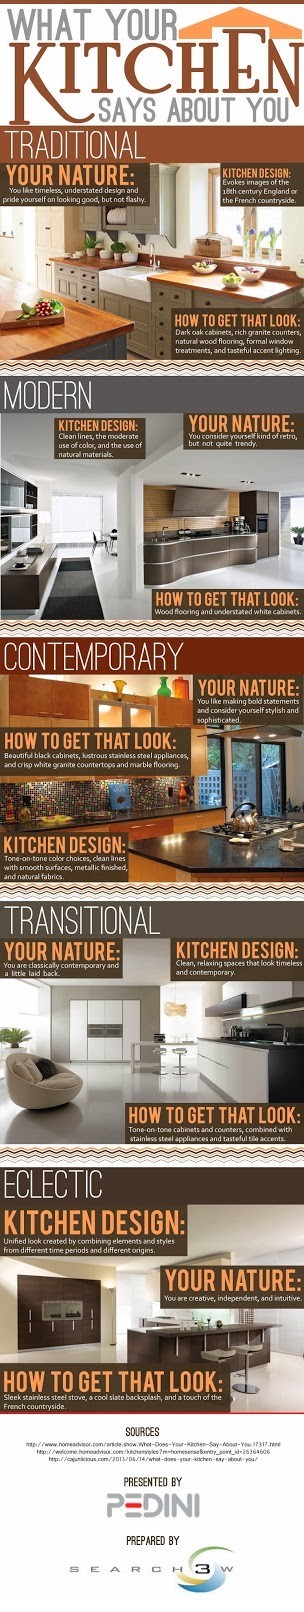 What Your Kitchen Says About You – Pedini